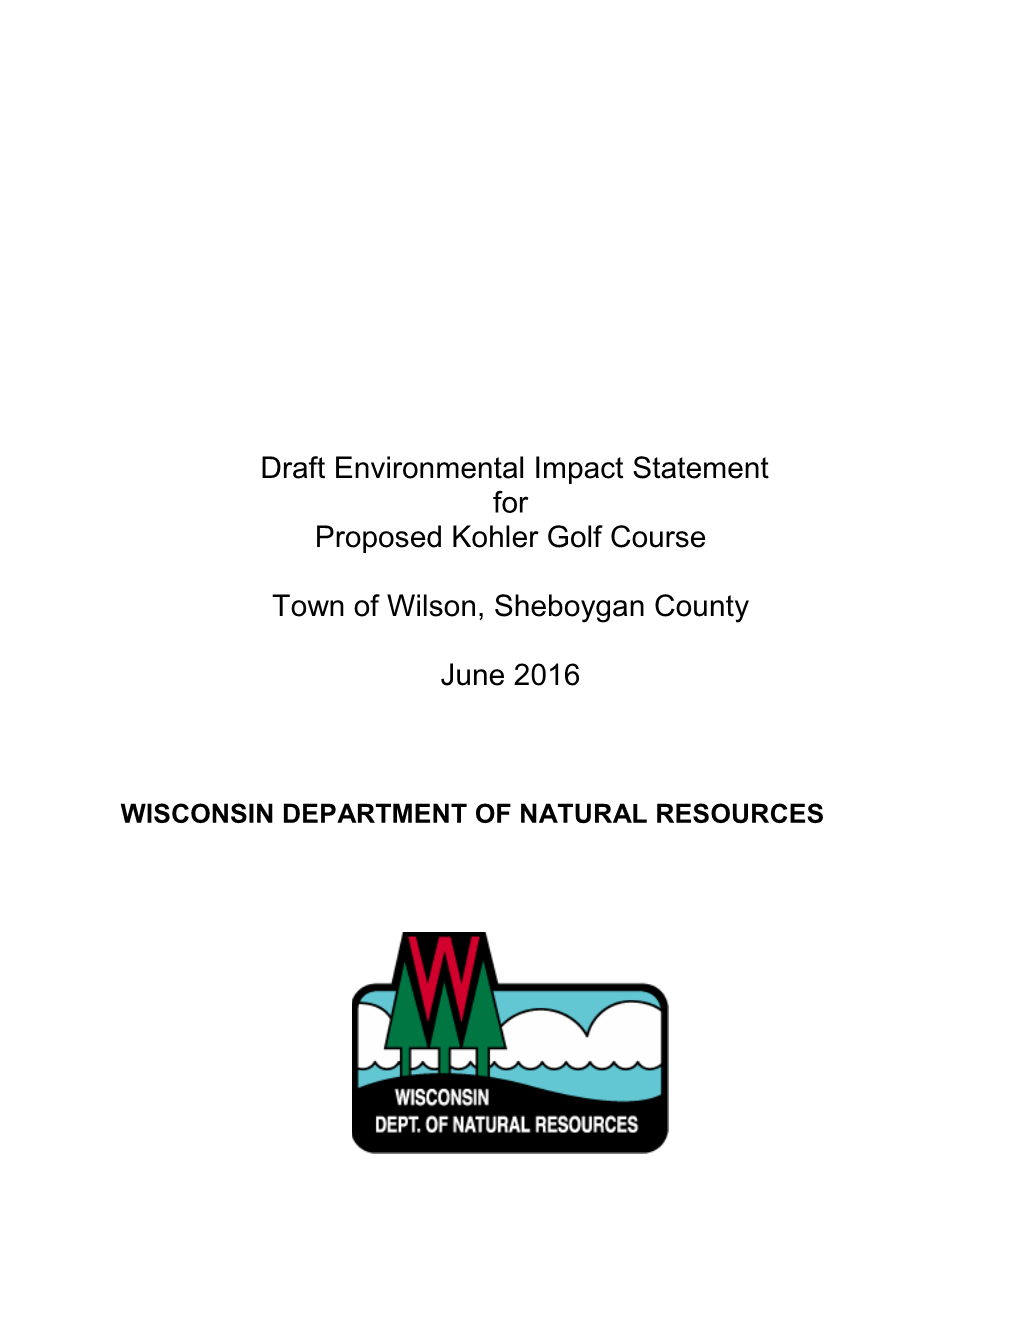 Draft Environmental Impact Statement for Proposed Kohler Golf Course